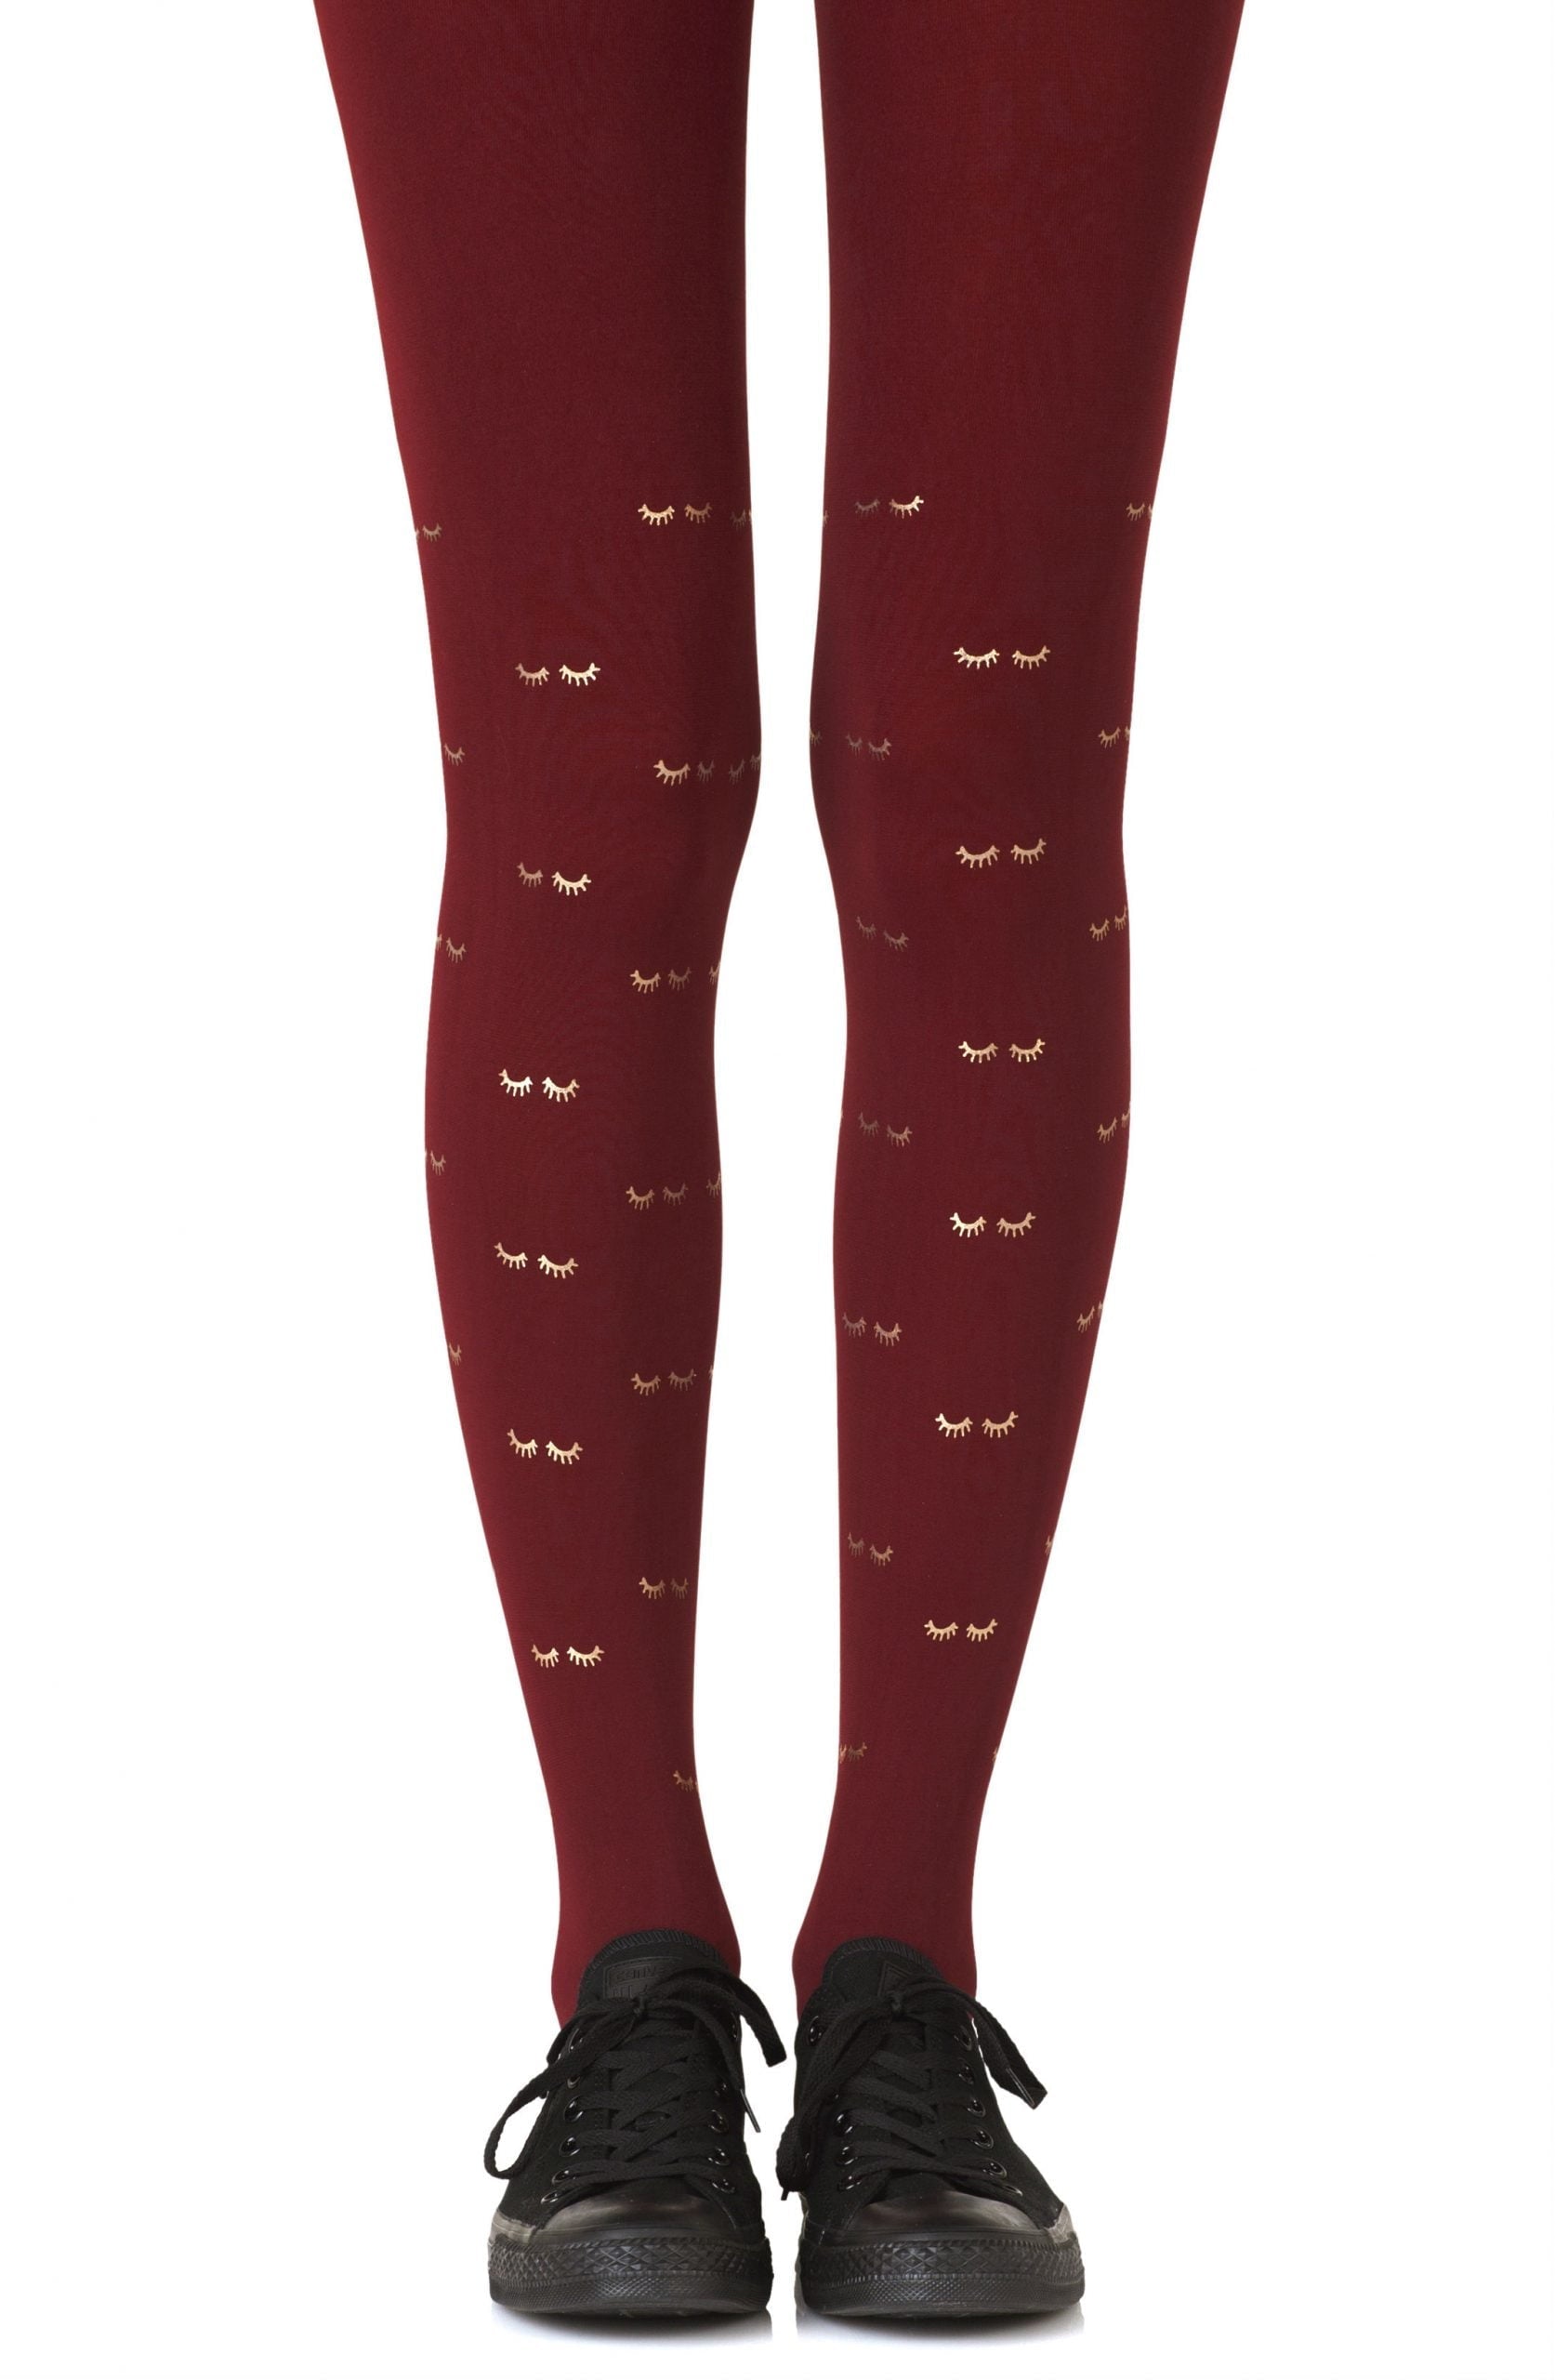 Vibrators, Sex Toy Kits and Sex Toys at Cloud9Adults - Zohara "Daydreaming" Burgundy Print Tights - Buy Sex Toys Online